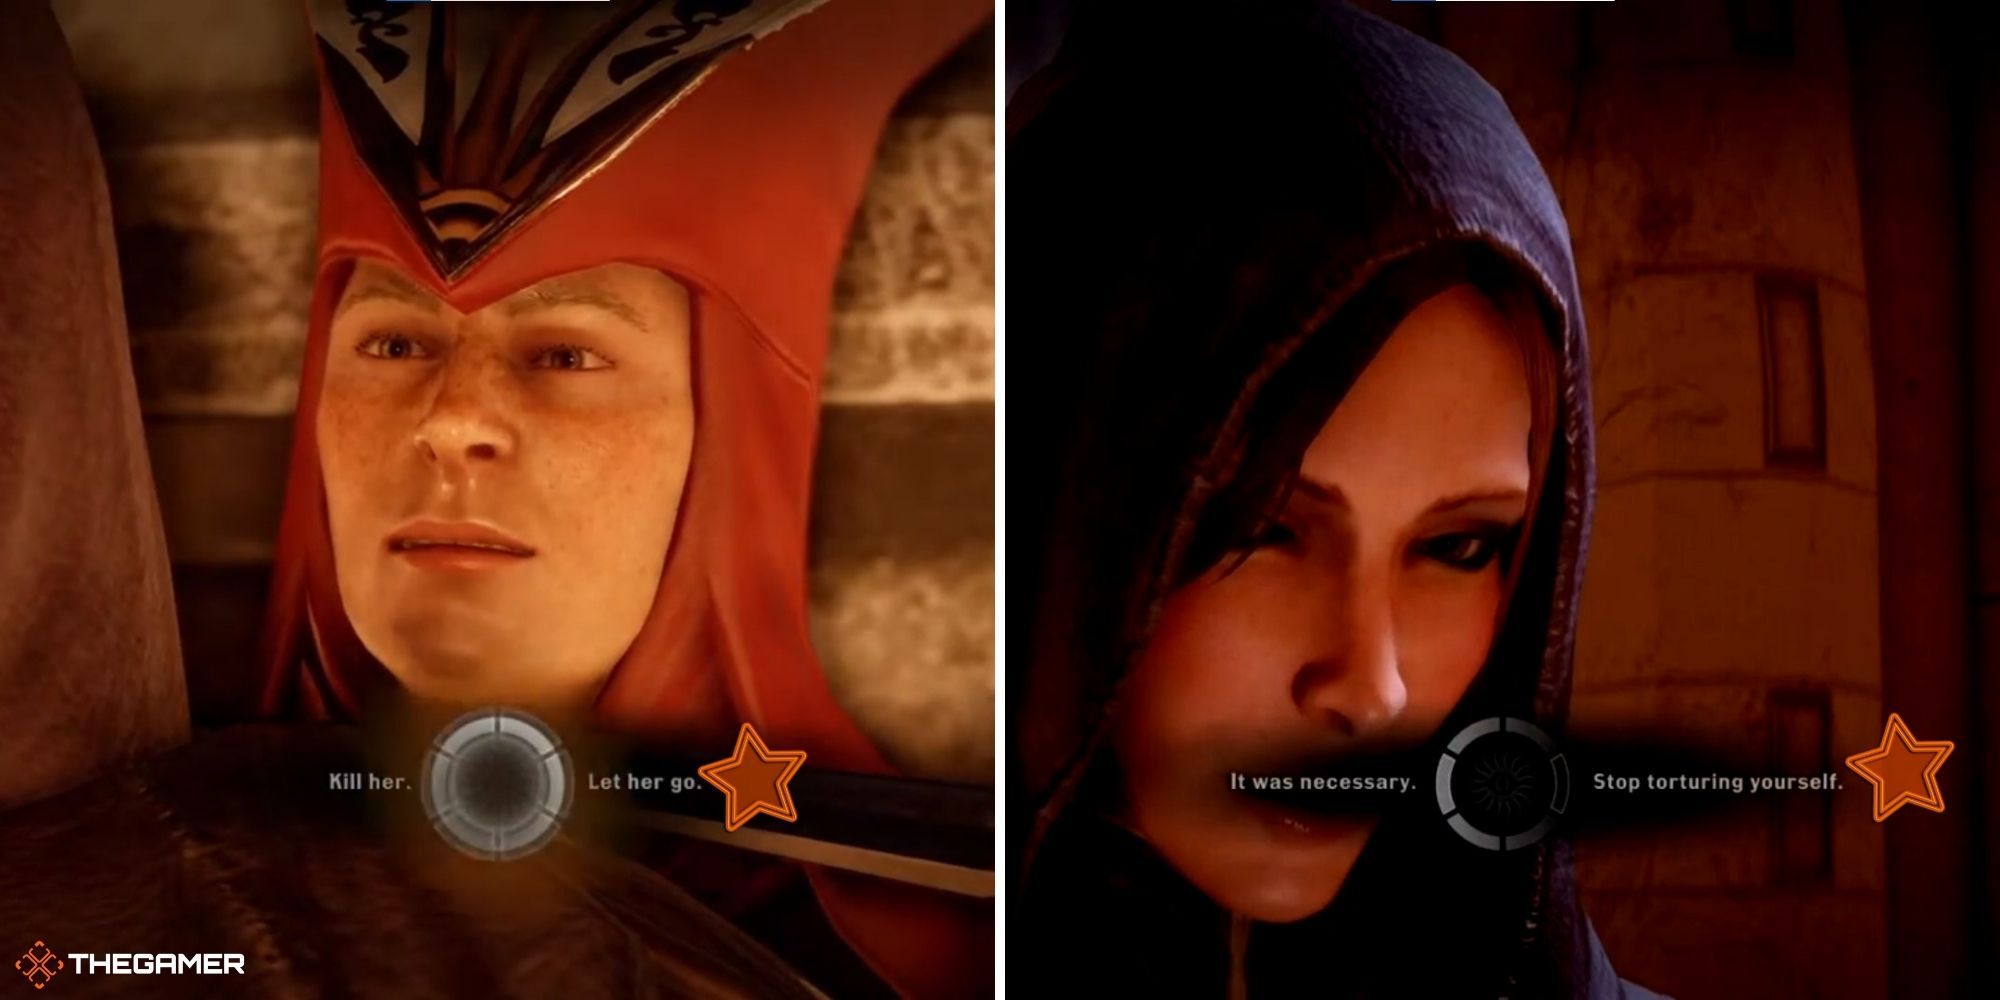 Dragon Age Inquisition - Natalie (left) and Leliana (right) In Front Of A Dialogue Wheel, Indicating How To Soften Leliana